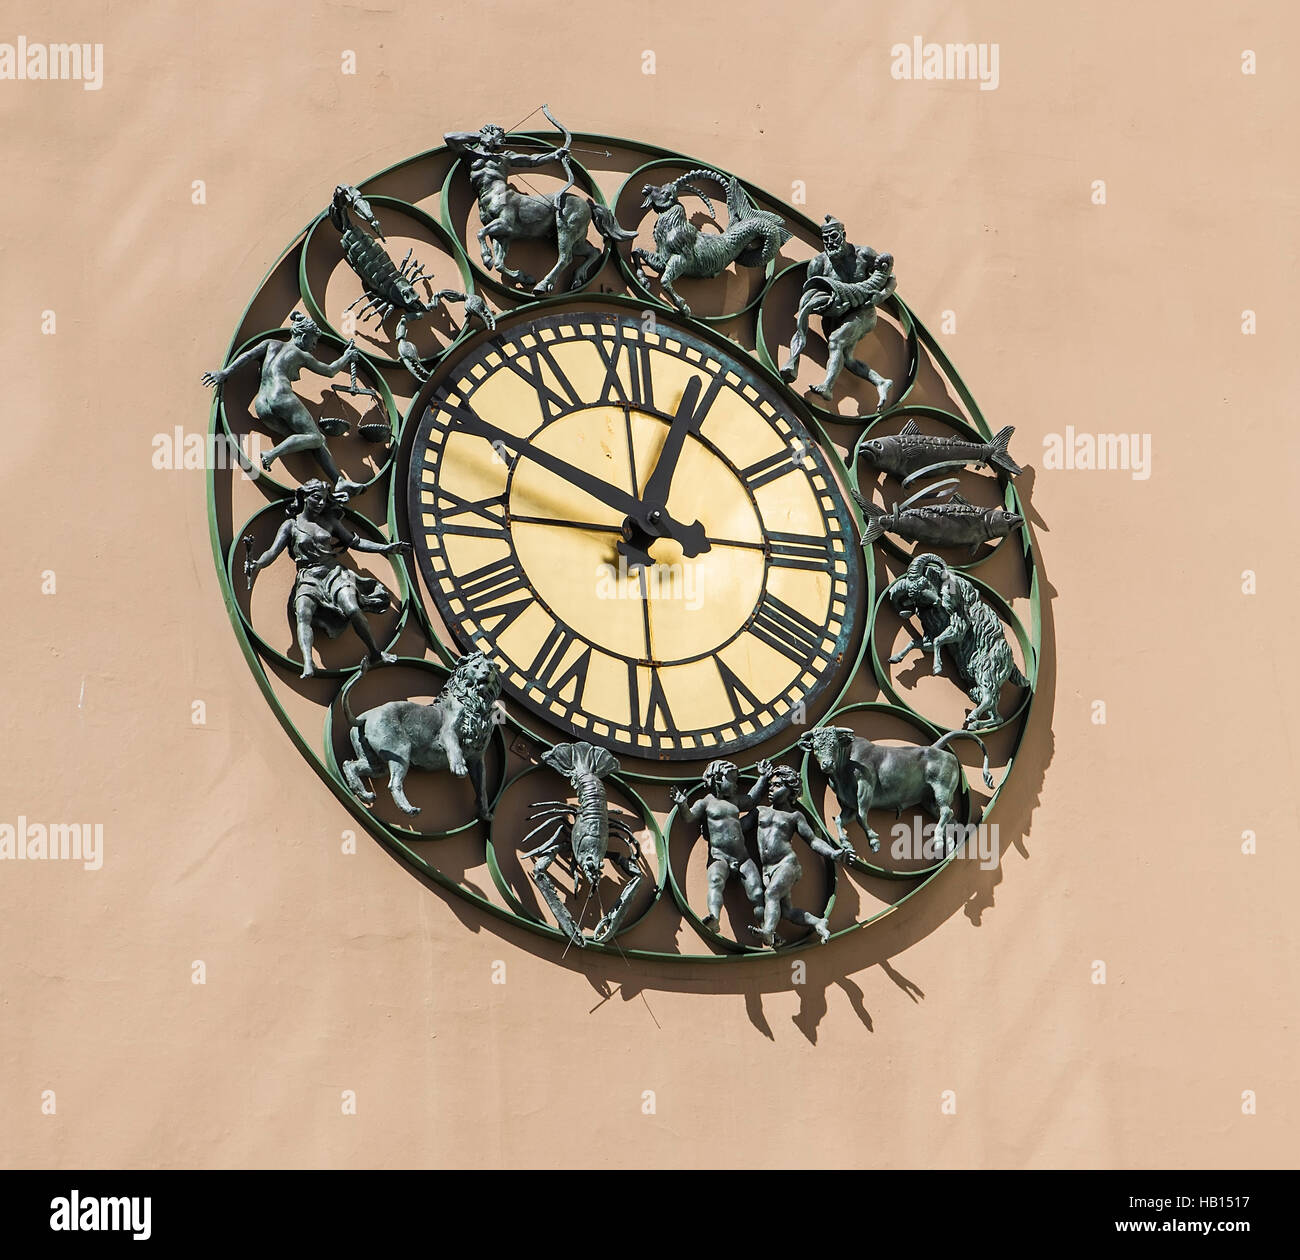 Wall clock with figurines zodiac signs. Oslo. Norway Stock Photo